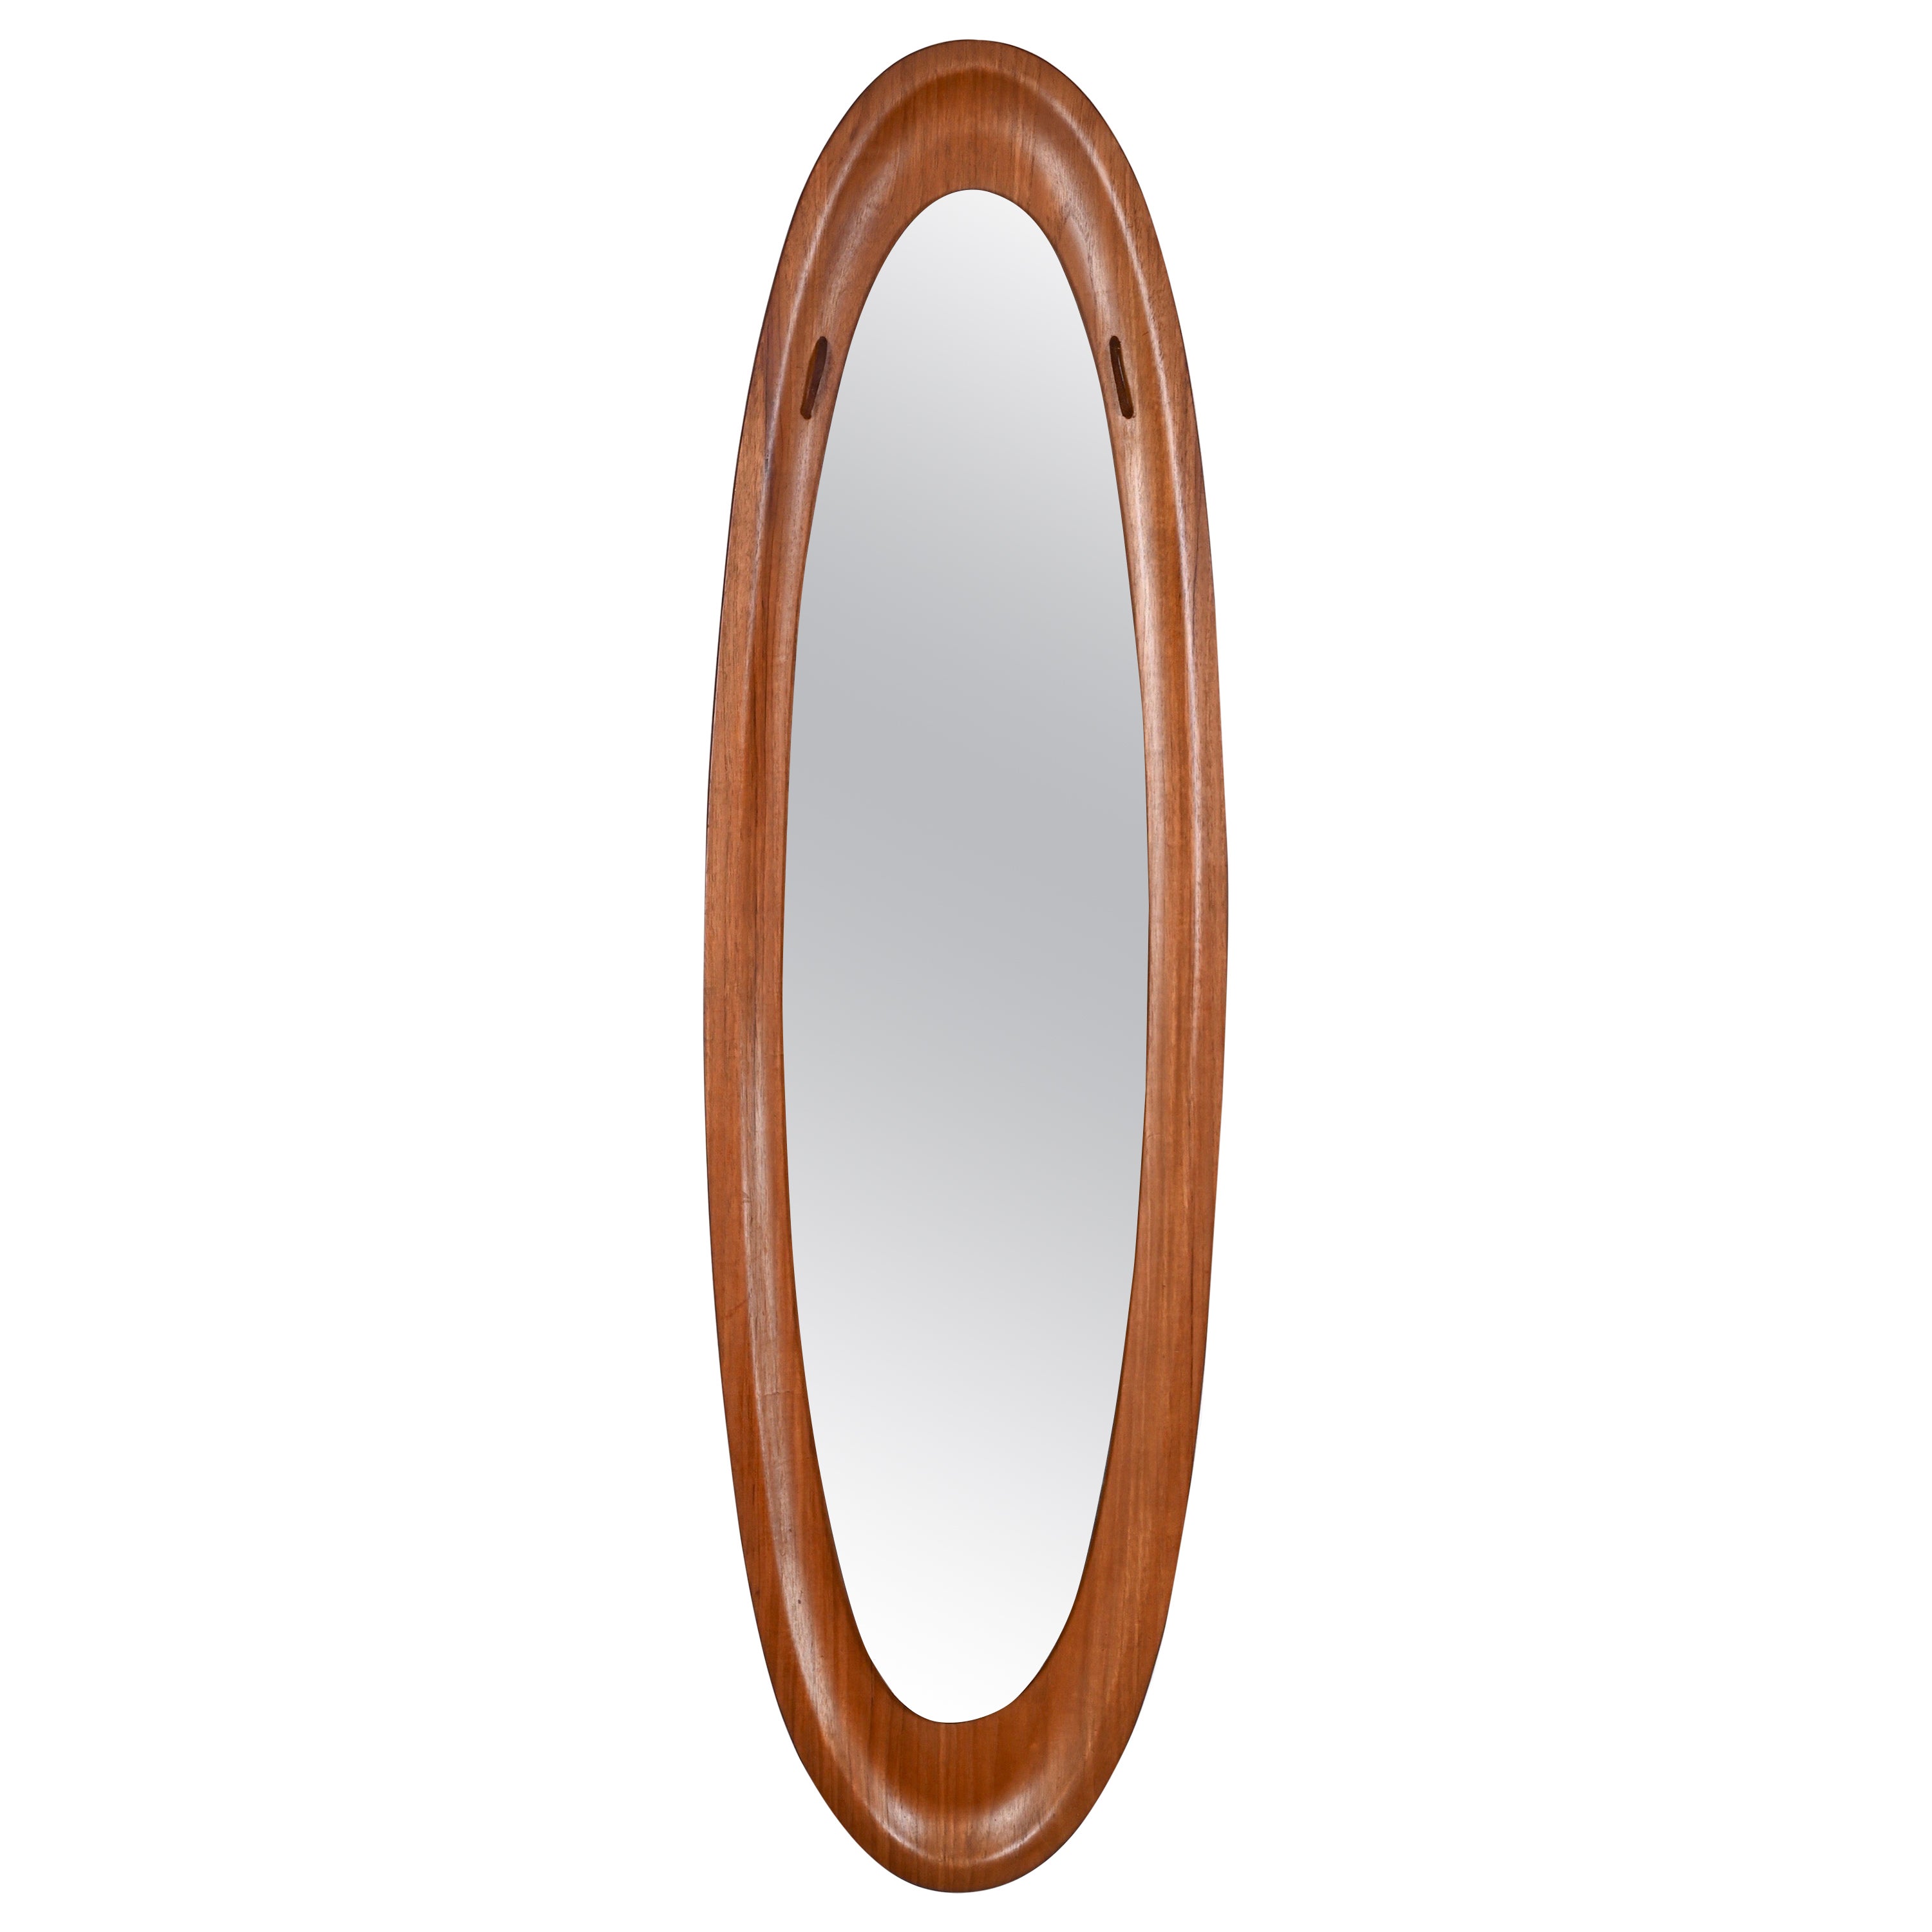 Mid-Century Campo & Graffi Curved Teak Wood Oval Wall Mirror, Italy, 1960s